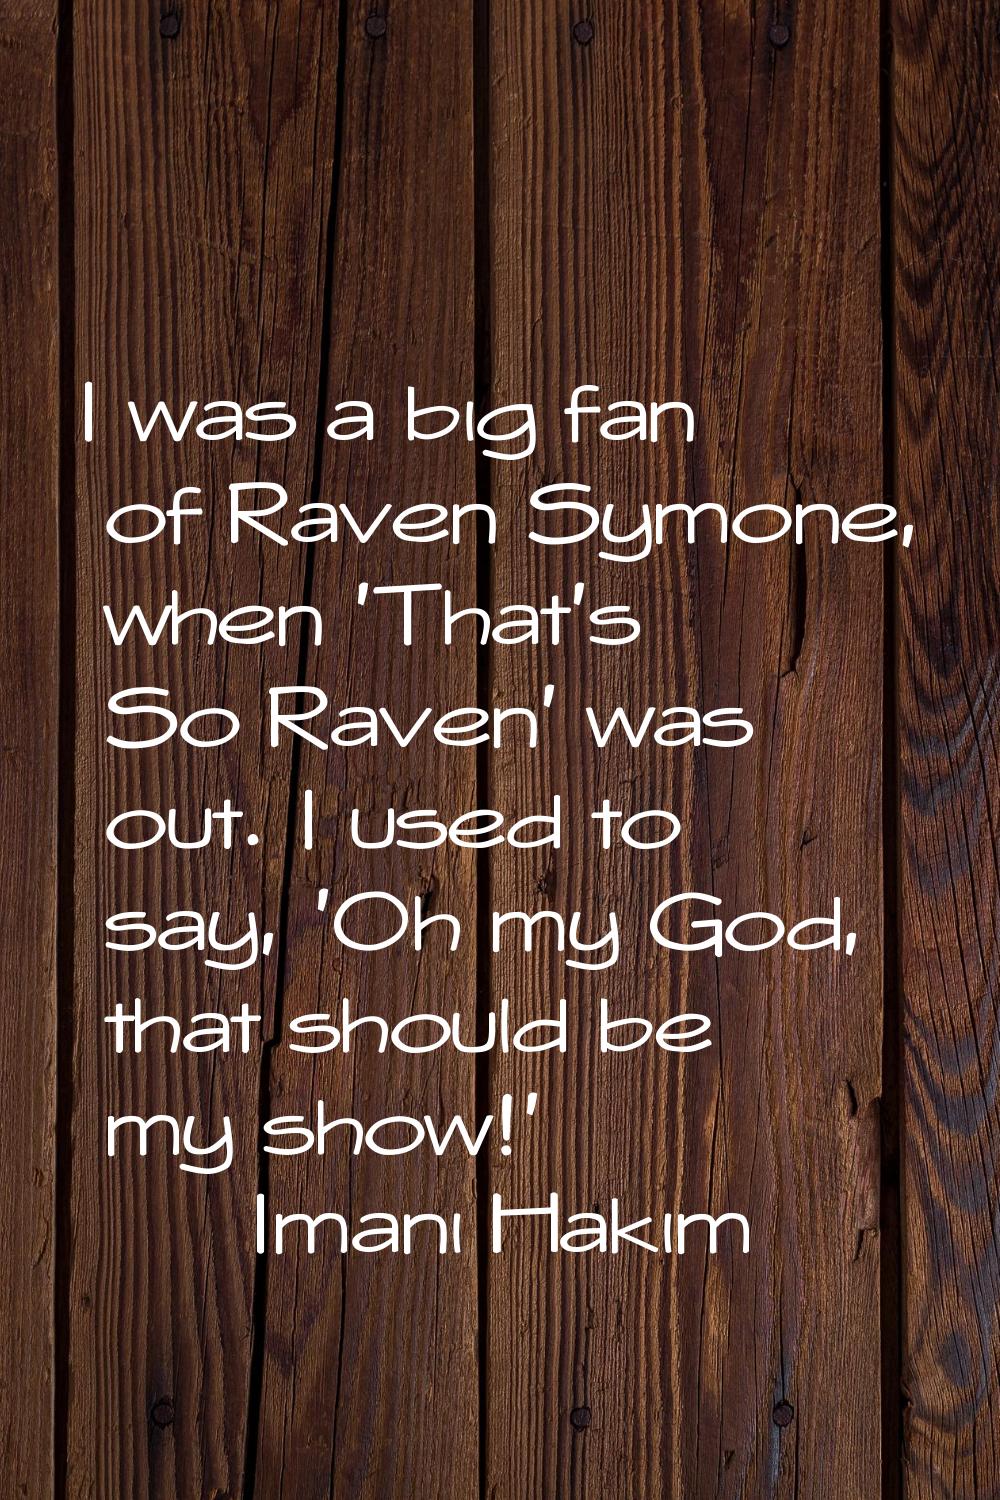 I was a big fan of Raven Symone, when 'That's So Raven' was out. I used to say, 'Oh my God, that sh